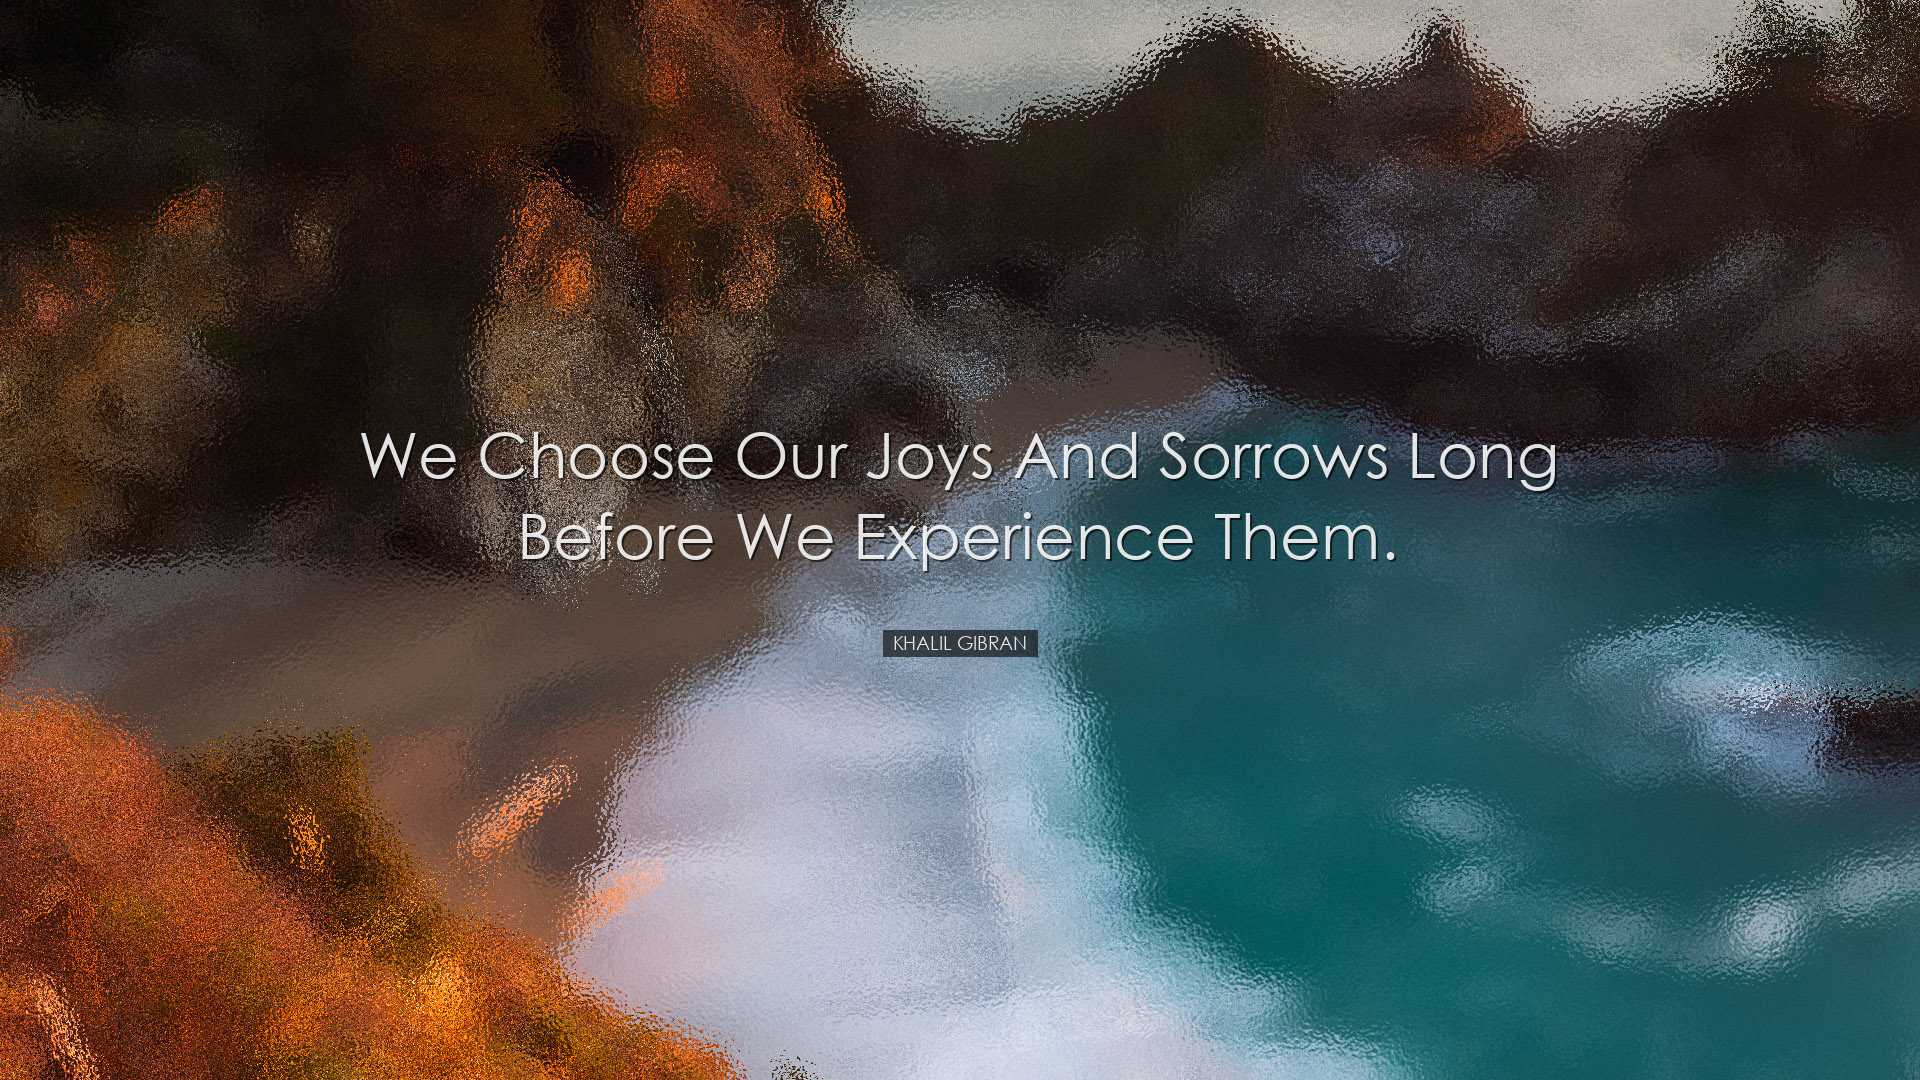 We choose our joys and sorrows long before we experience them. - K